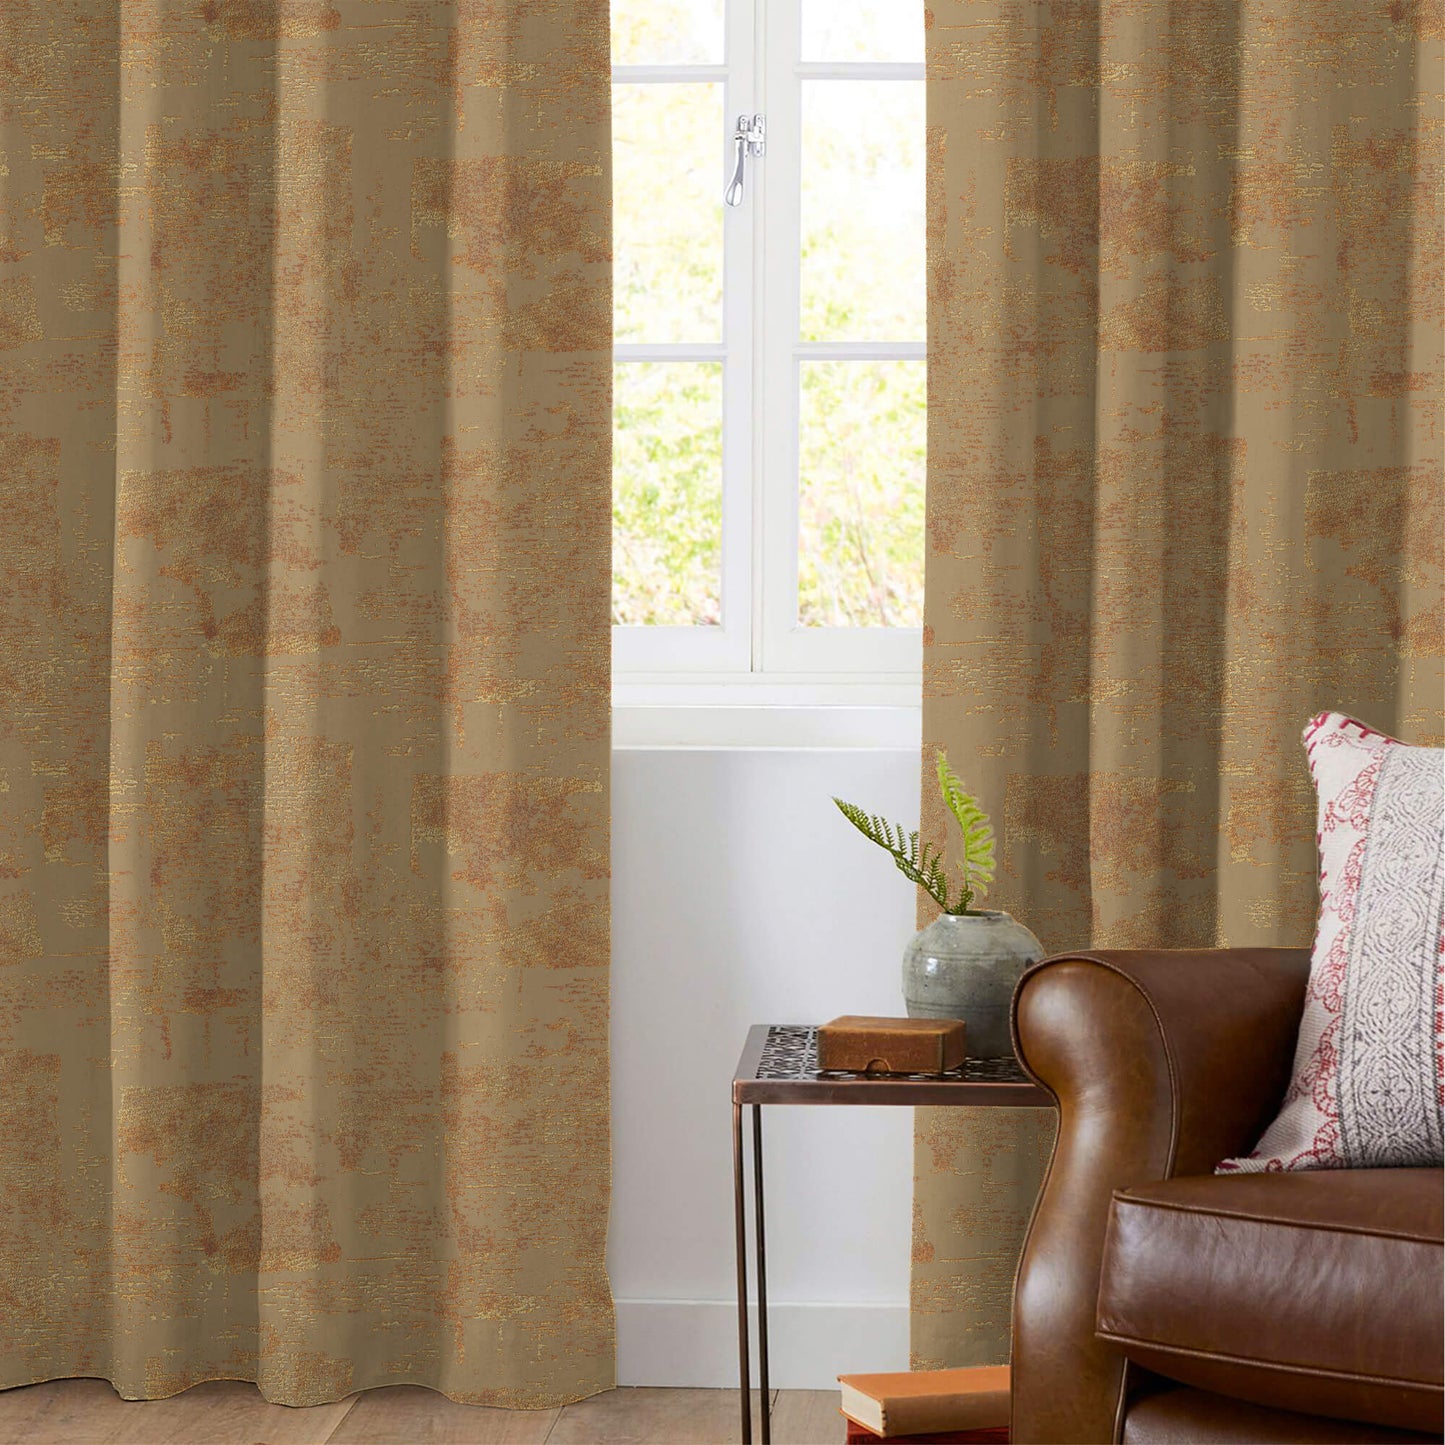 Tawny Brown Abstract Pattern Golden Foil Premium Curtain Fabric (Width 54 Inches)